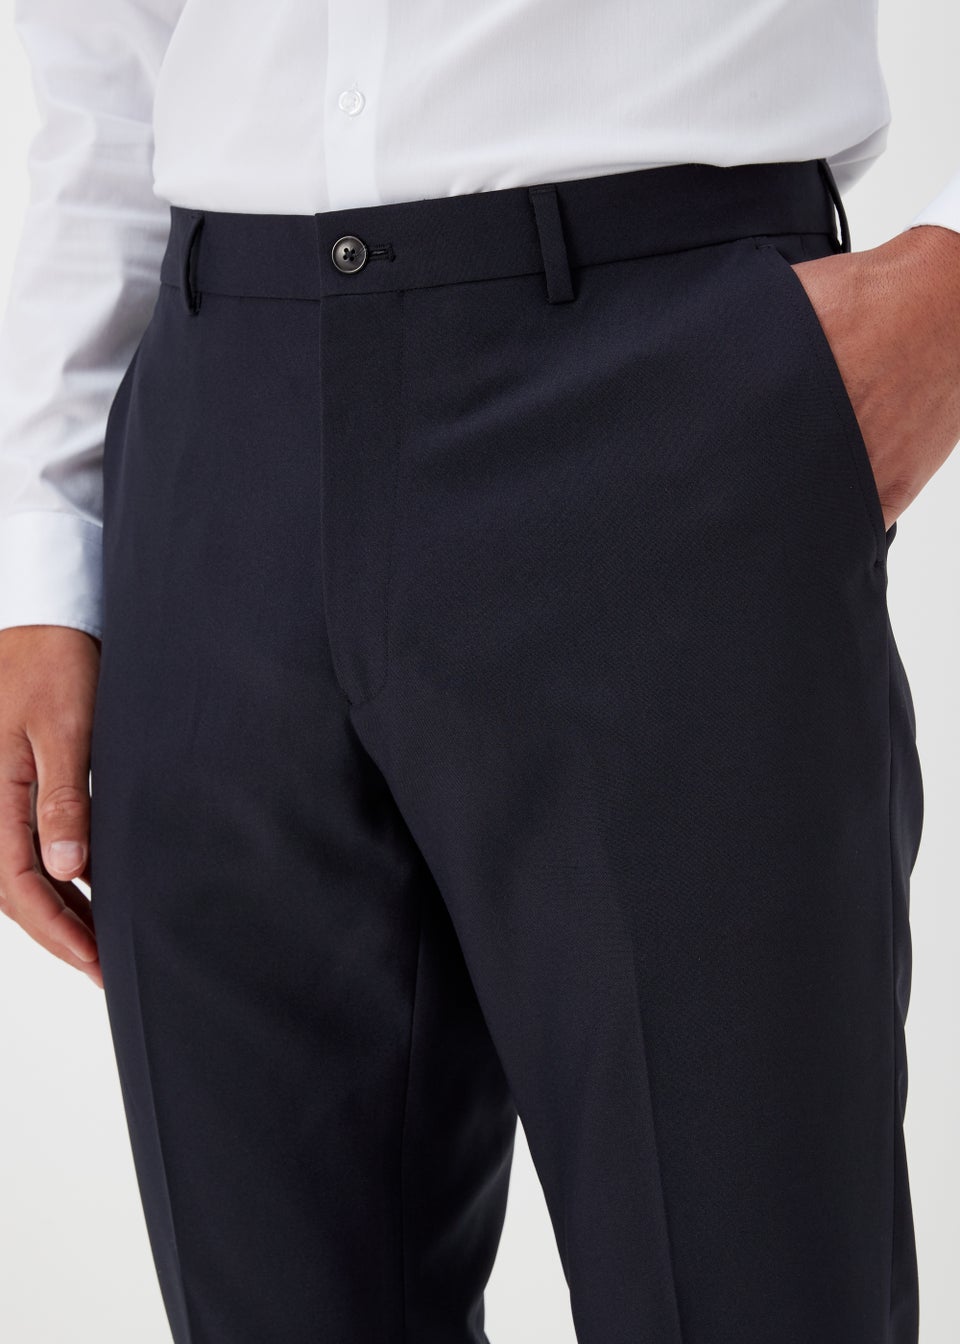 Taylor & Wright Panama Navy Slim Fit Suit Trousers